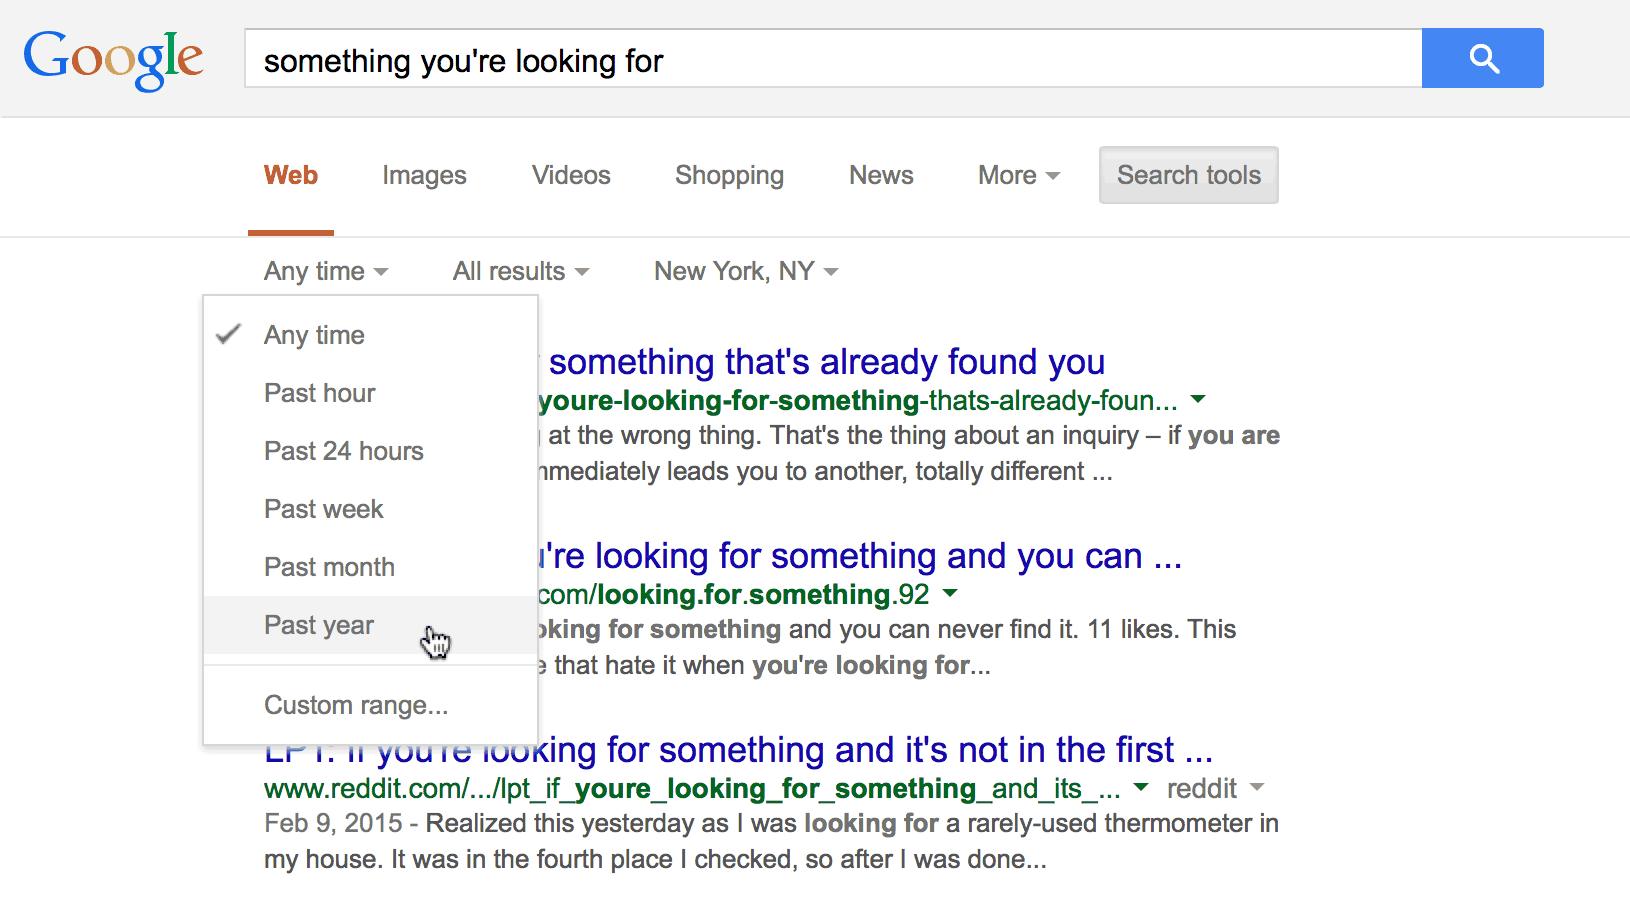 Google search results showing Search tools